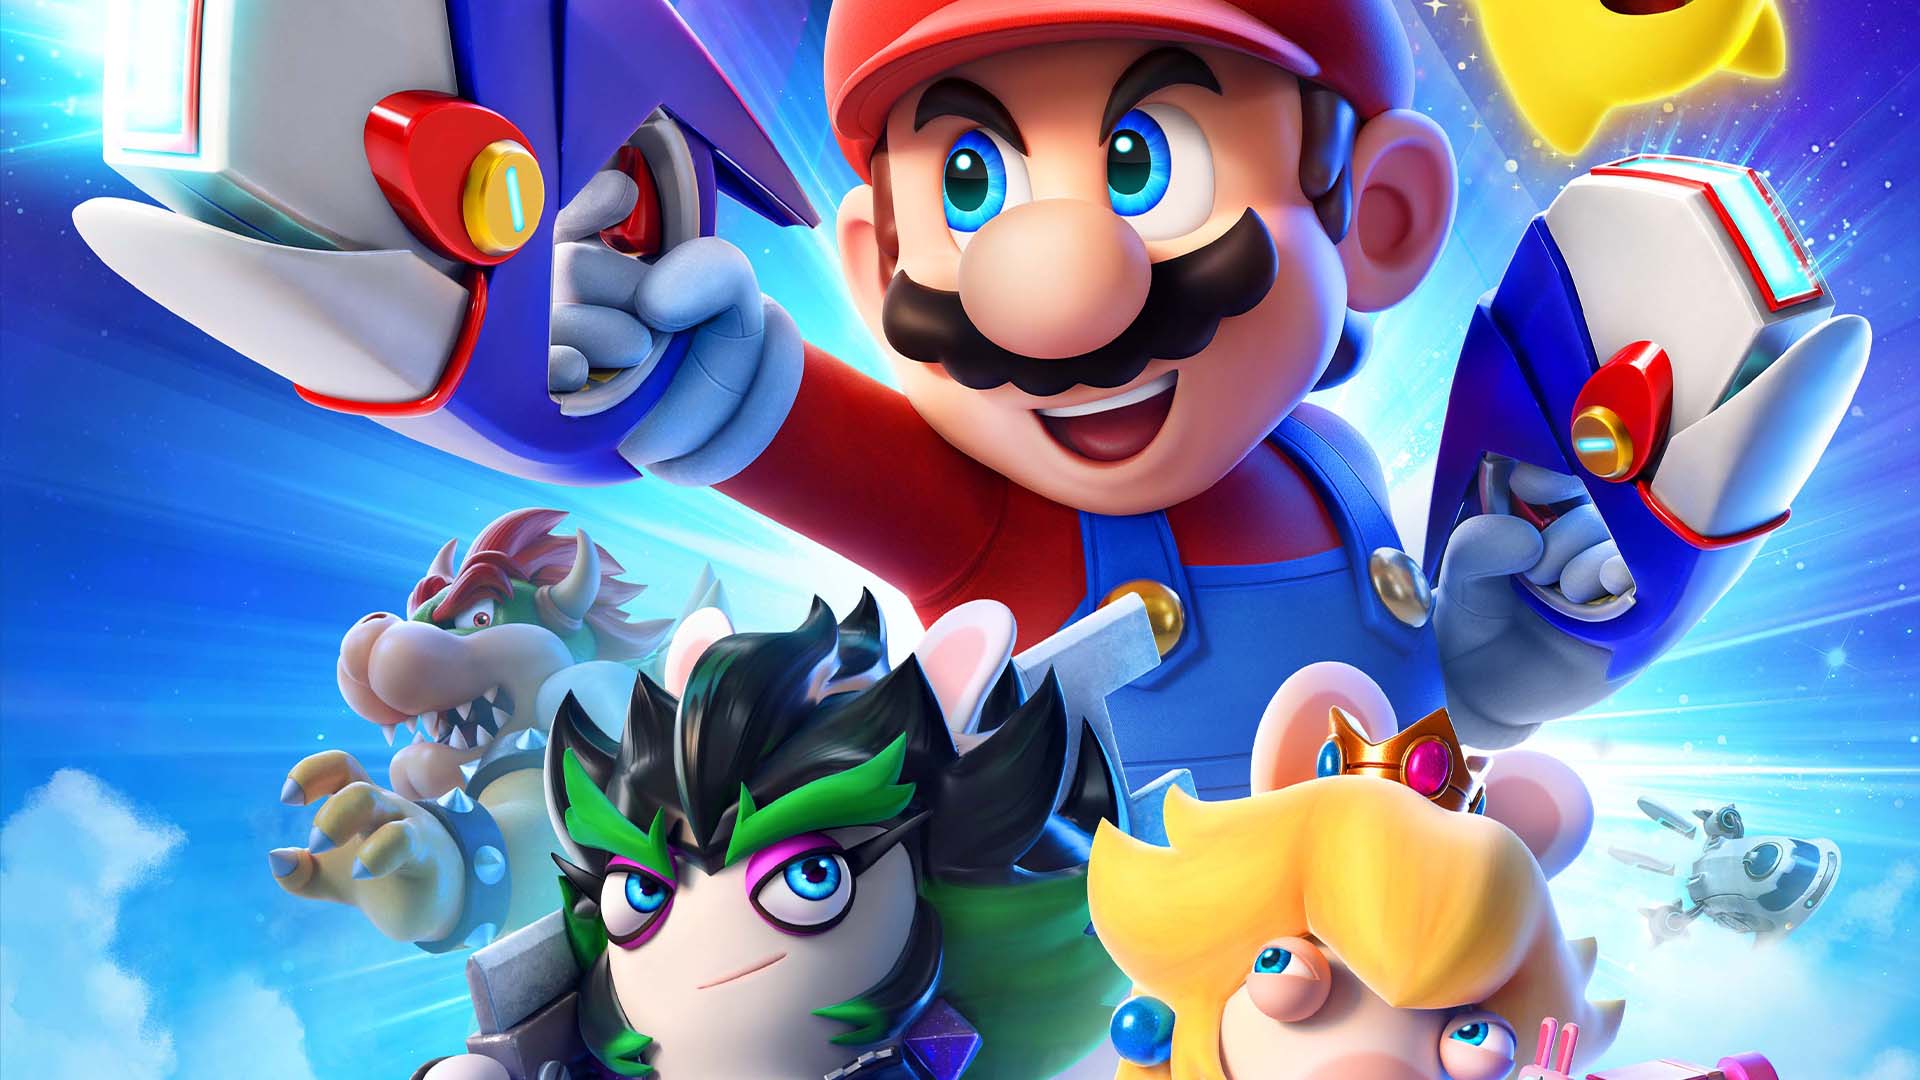 Mario + Rabbids Kingdom Battle guide: Our best tips for a big head